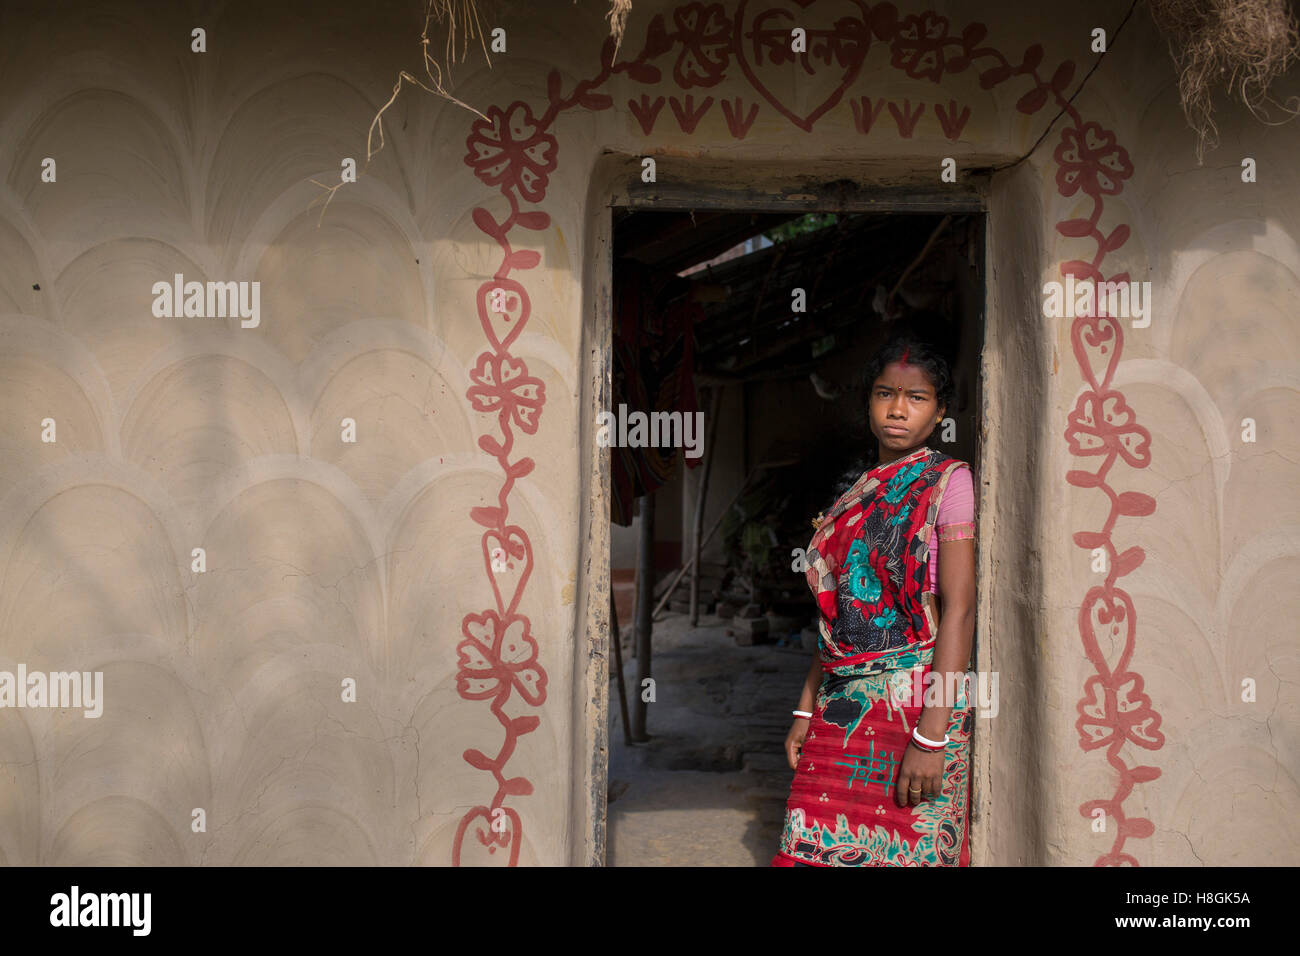 North Bengal, Bangladesh. 11th November, 2016. A santal women inside her house in North Bengal in Bangladesh, on November 10, 2016. lifestyle and view of houses of a rural village in Bangladesh. These houses are made by mud and  the walls are beautifully painted using natural colours and the interiors.Santal tribe and hindu people are living these houses.The village paintings are considered auspicious symbols related to fertility and fecundity being painted on the walls. Credit:  zakir hossain chowdhury zakir/Alamy Live News Stock Photo